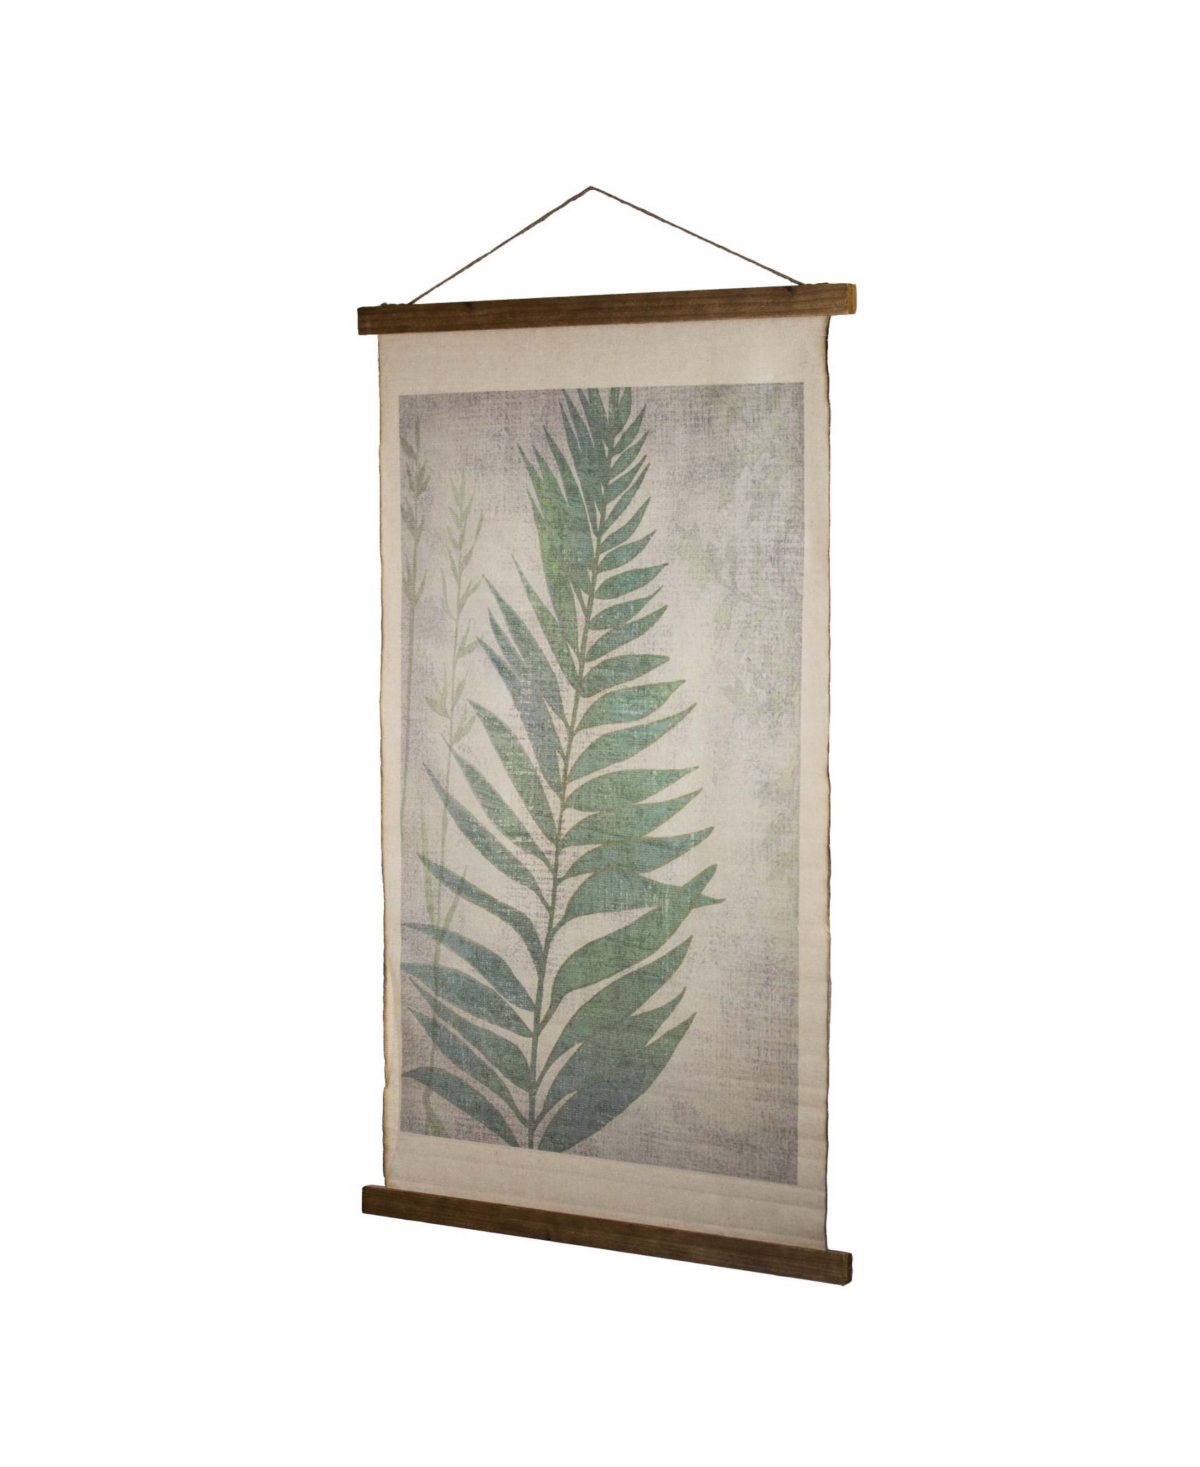 Crystal Art Gallery American Art Decor Leaf Scroll Hanging Tapestry In Green